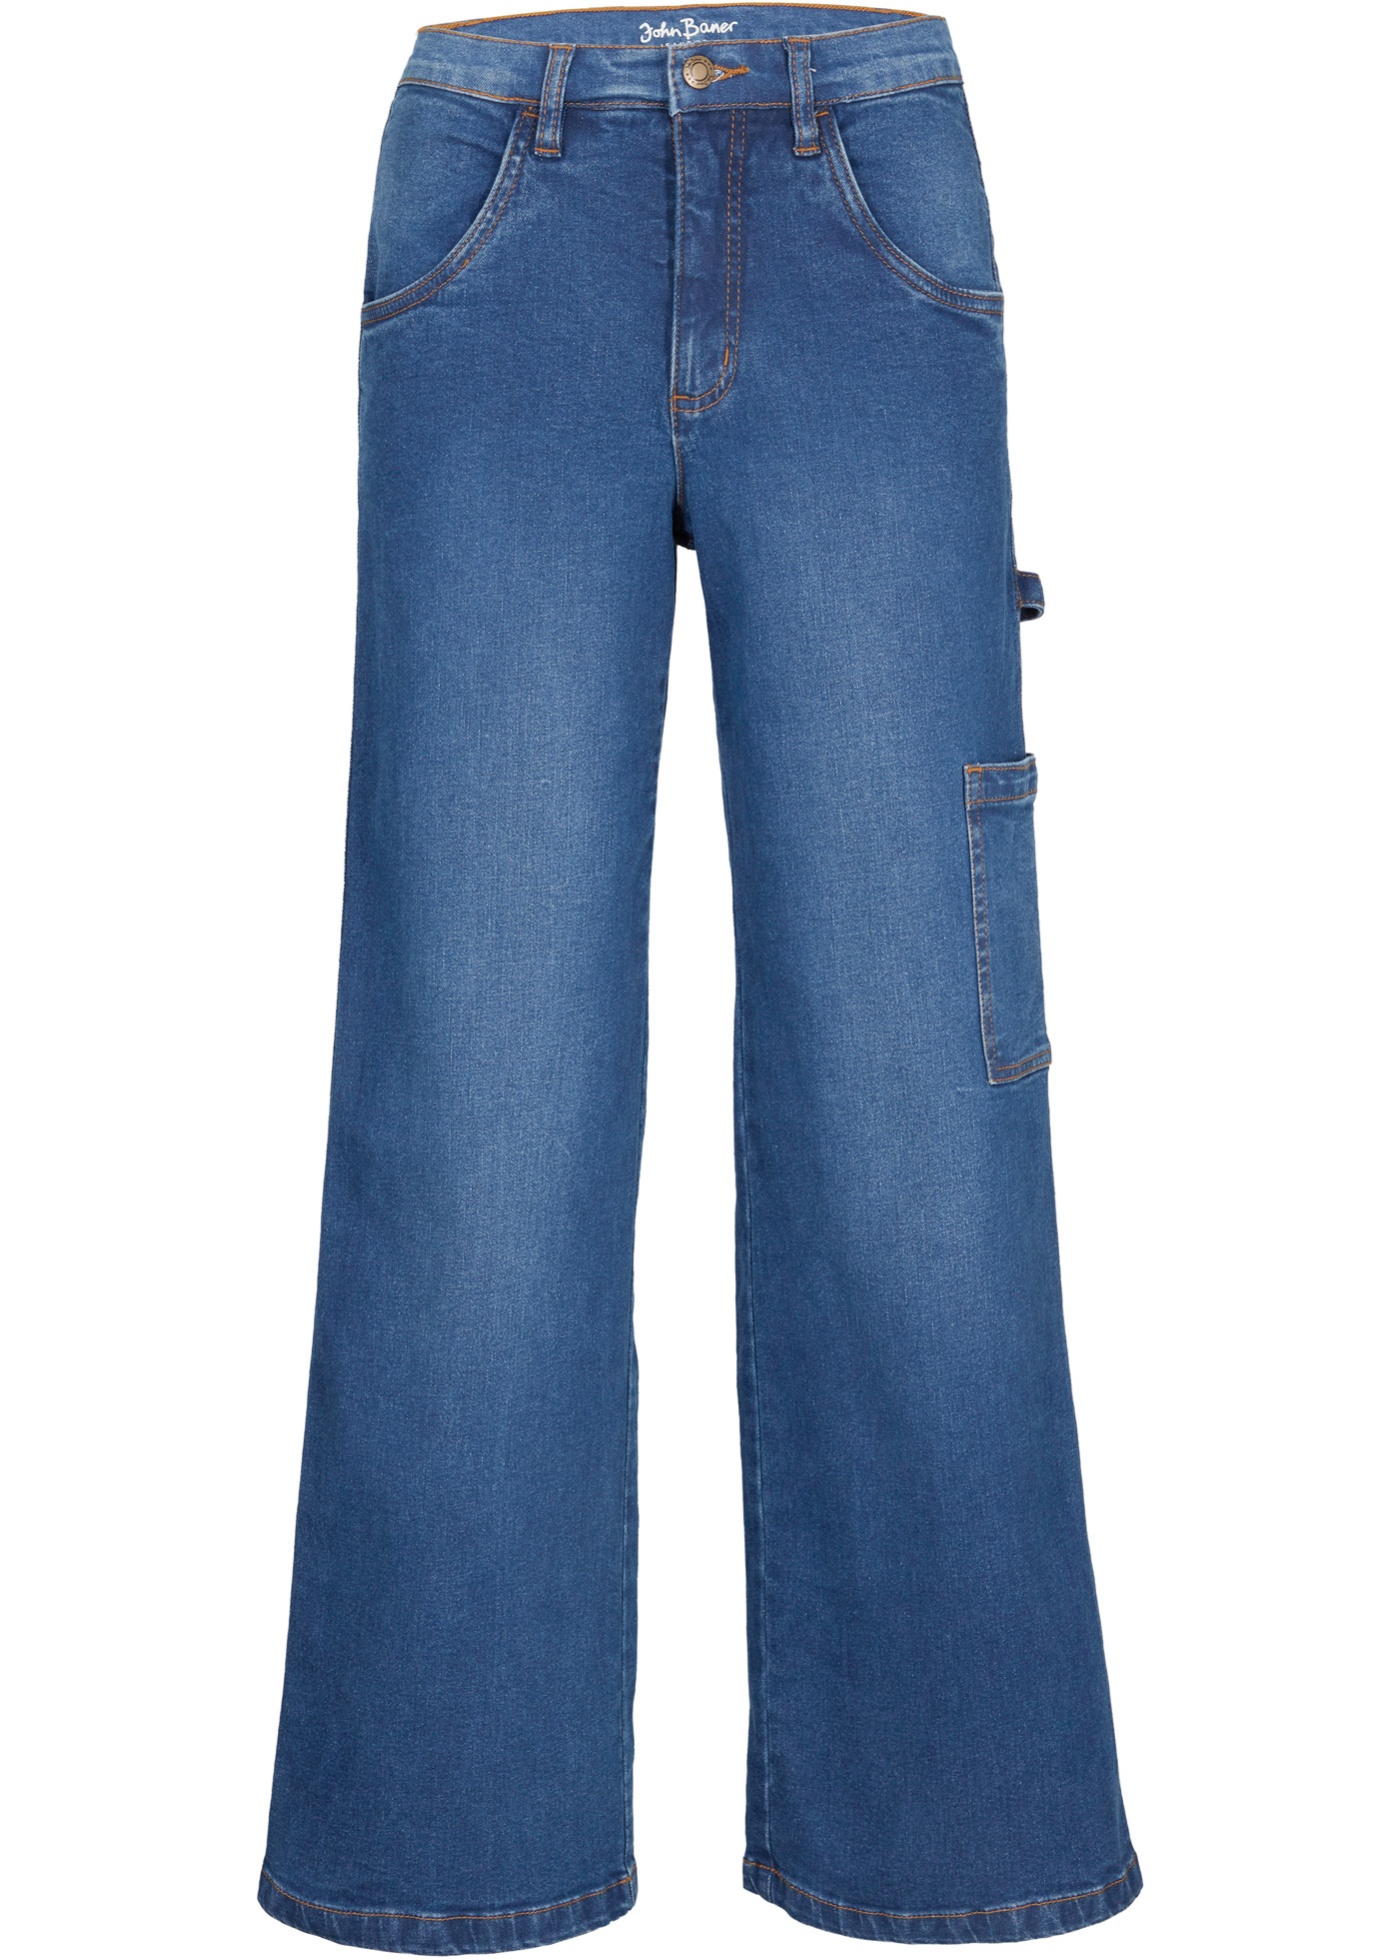 Stretch jeans, worker jeans, wide, high rise